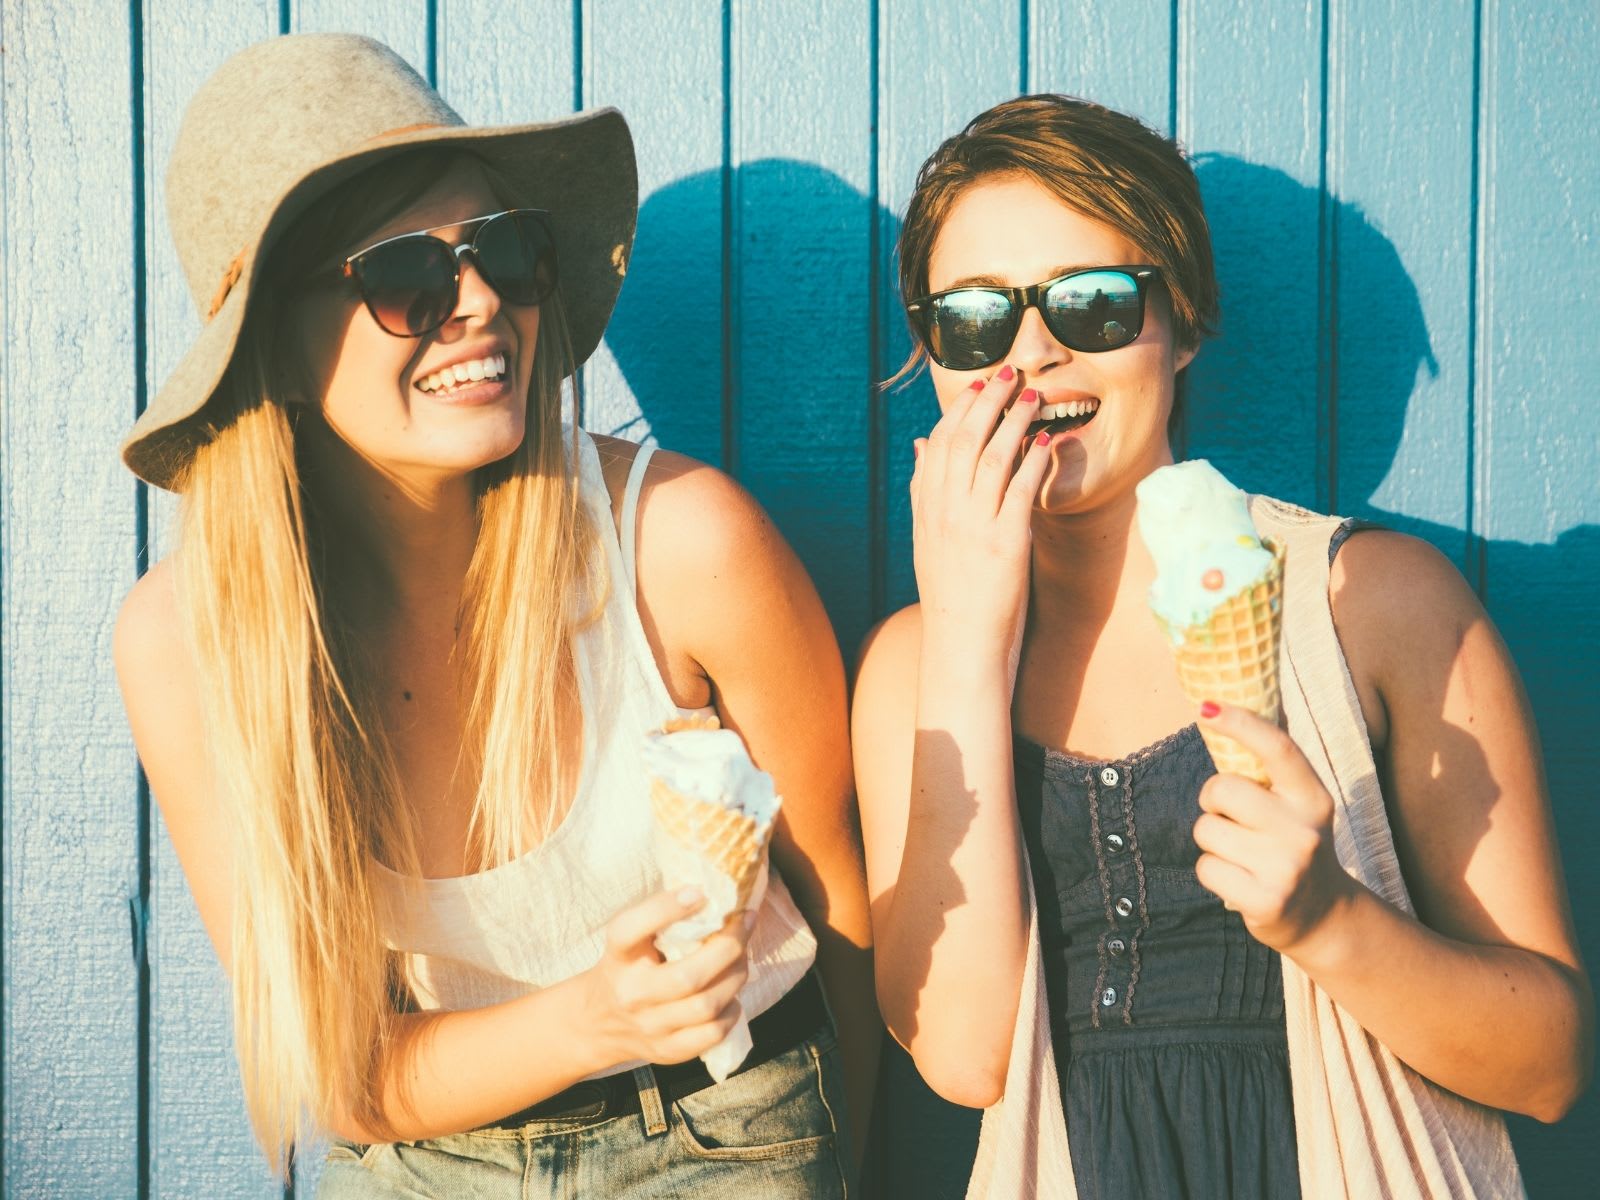 Friends laughing with ice-cream in hand